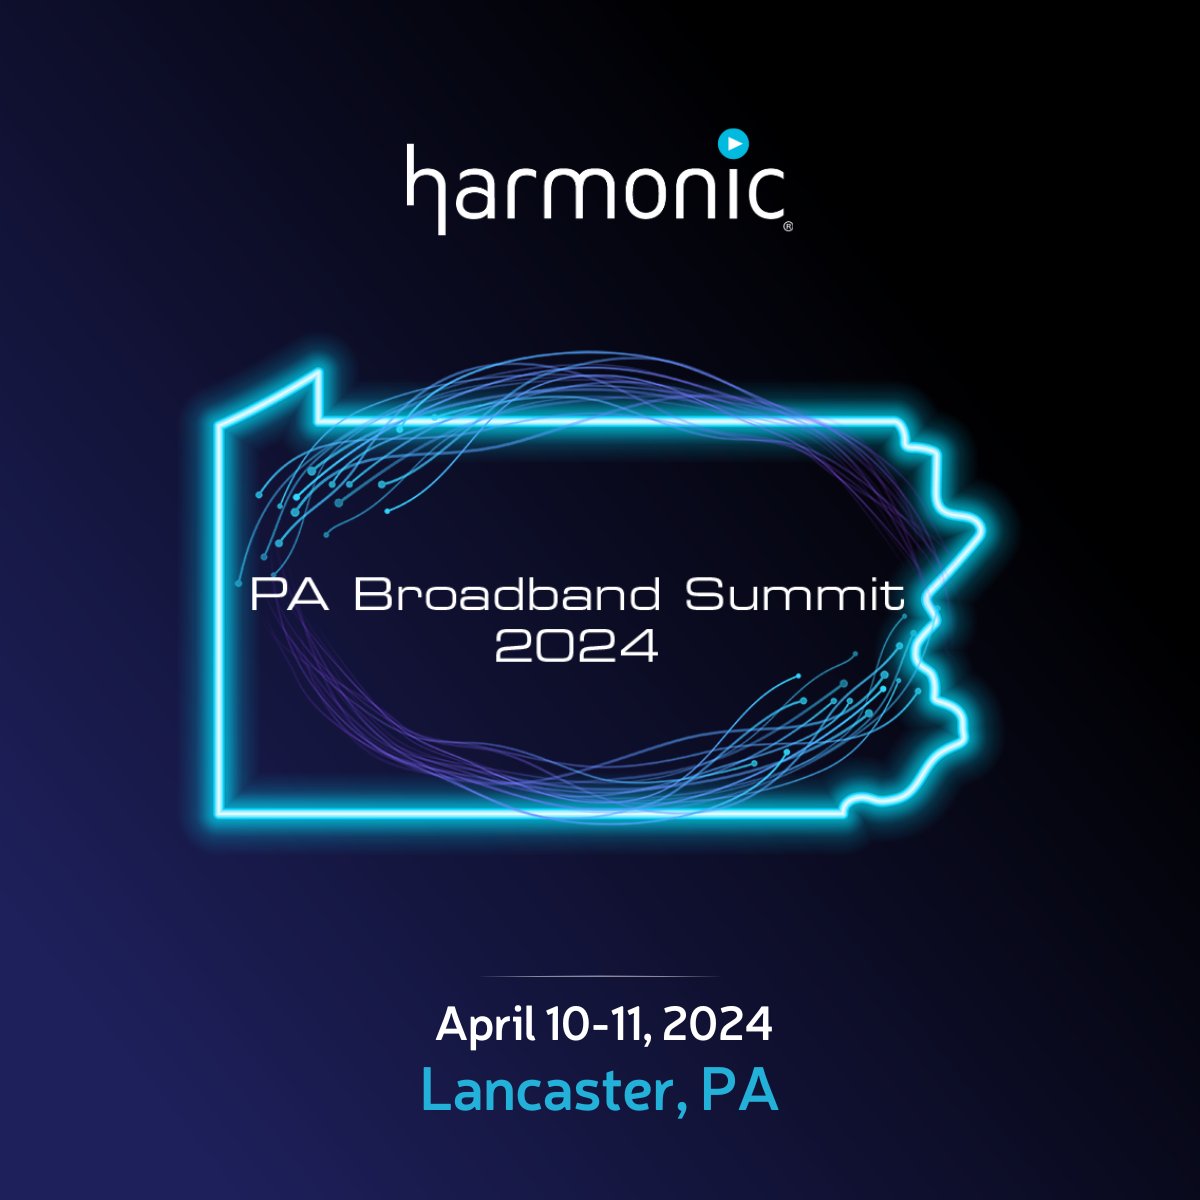 Harmonic's #cOS virtualized #broadband platform supports multiple #PON technologies, including XGS-PON, COMBO-PON and 10G-EPON, to simplify migrations and accelerate service enhancement. Meet us this week at the Pennsylvania Broadband Summit in Lancaster! 👋